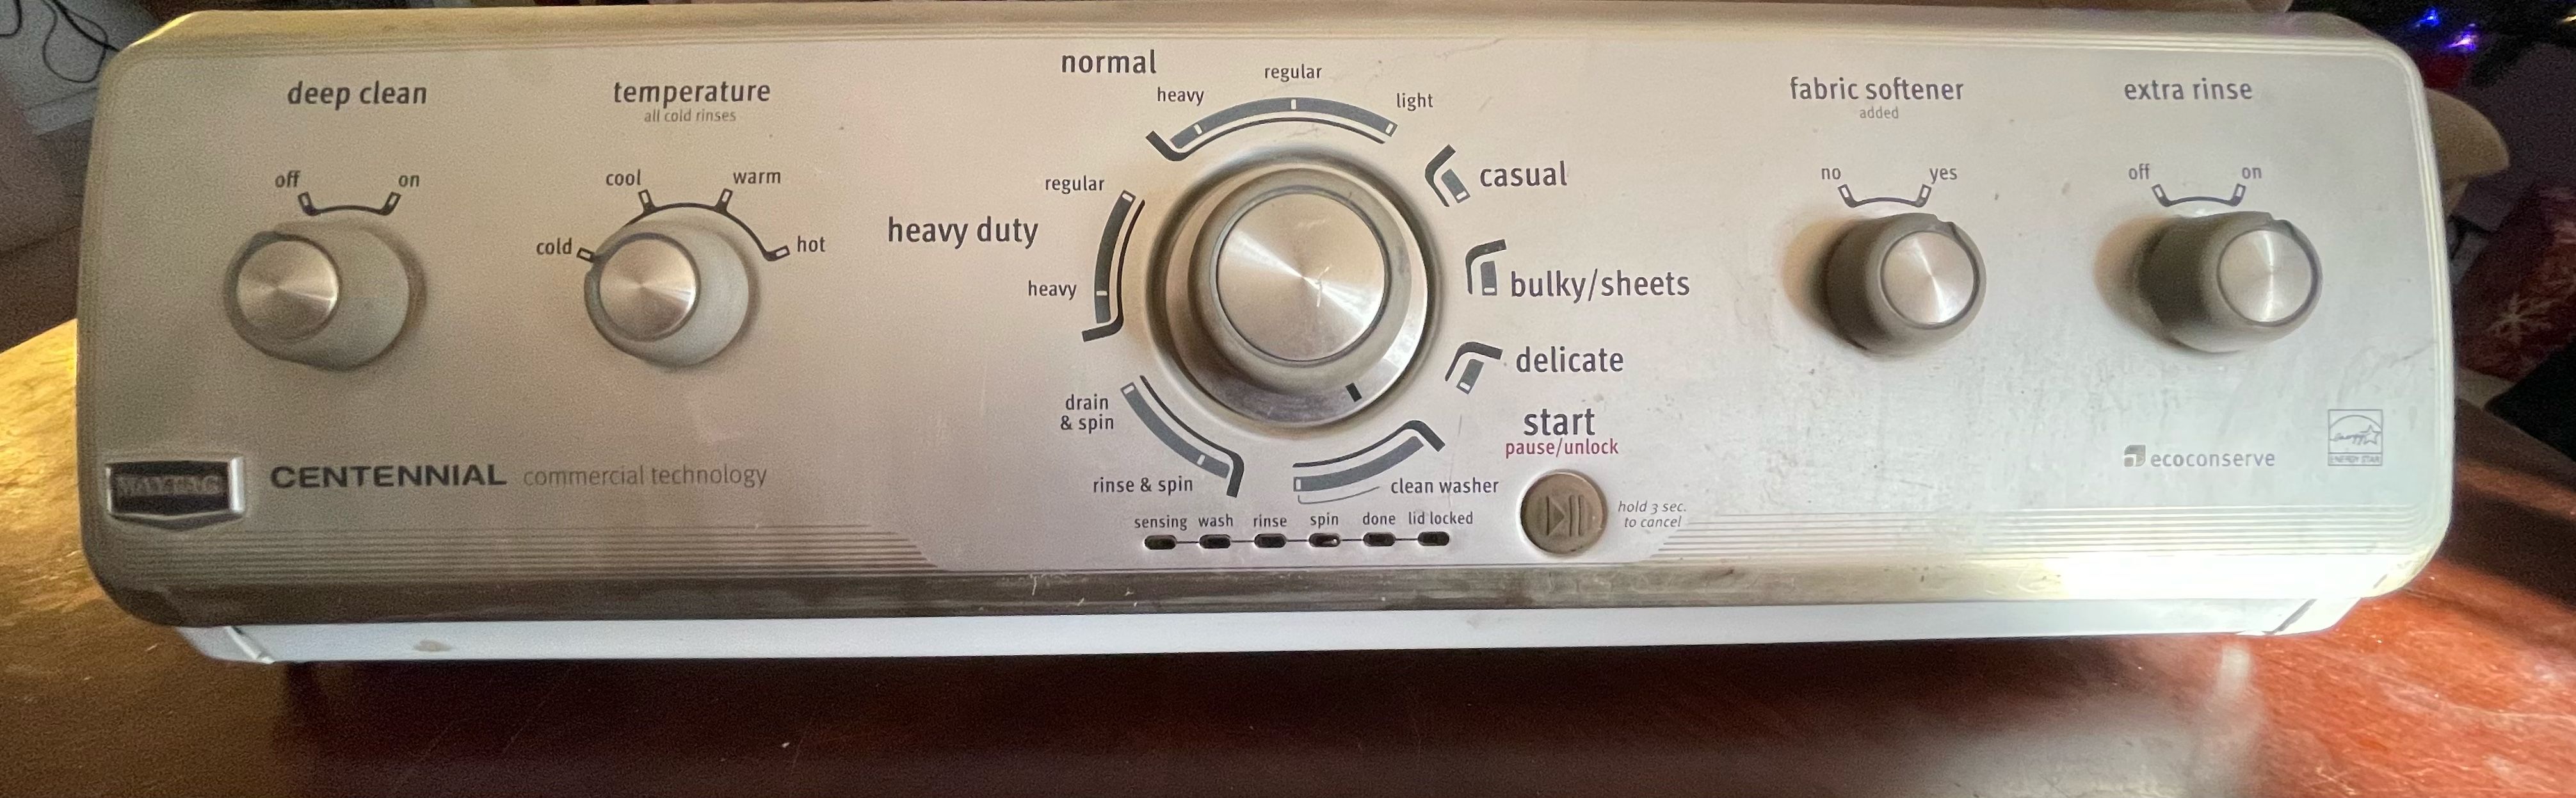 Maytag Centennial Washer Complete Control Board With Knobs 